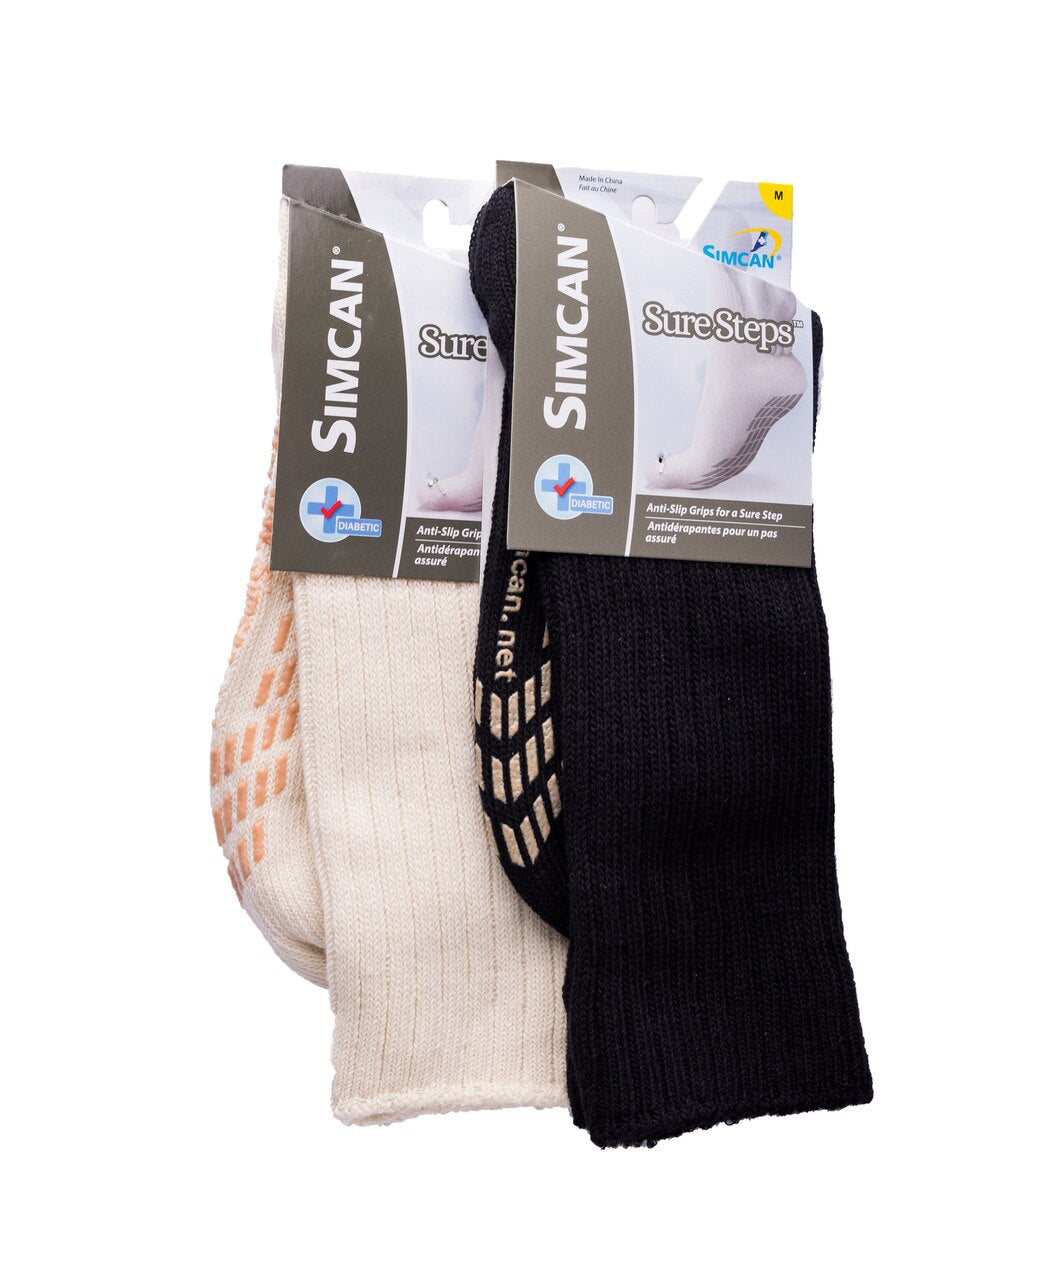 socks with grippers for adults, socks with grippers for adults